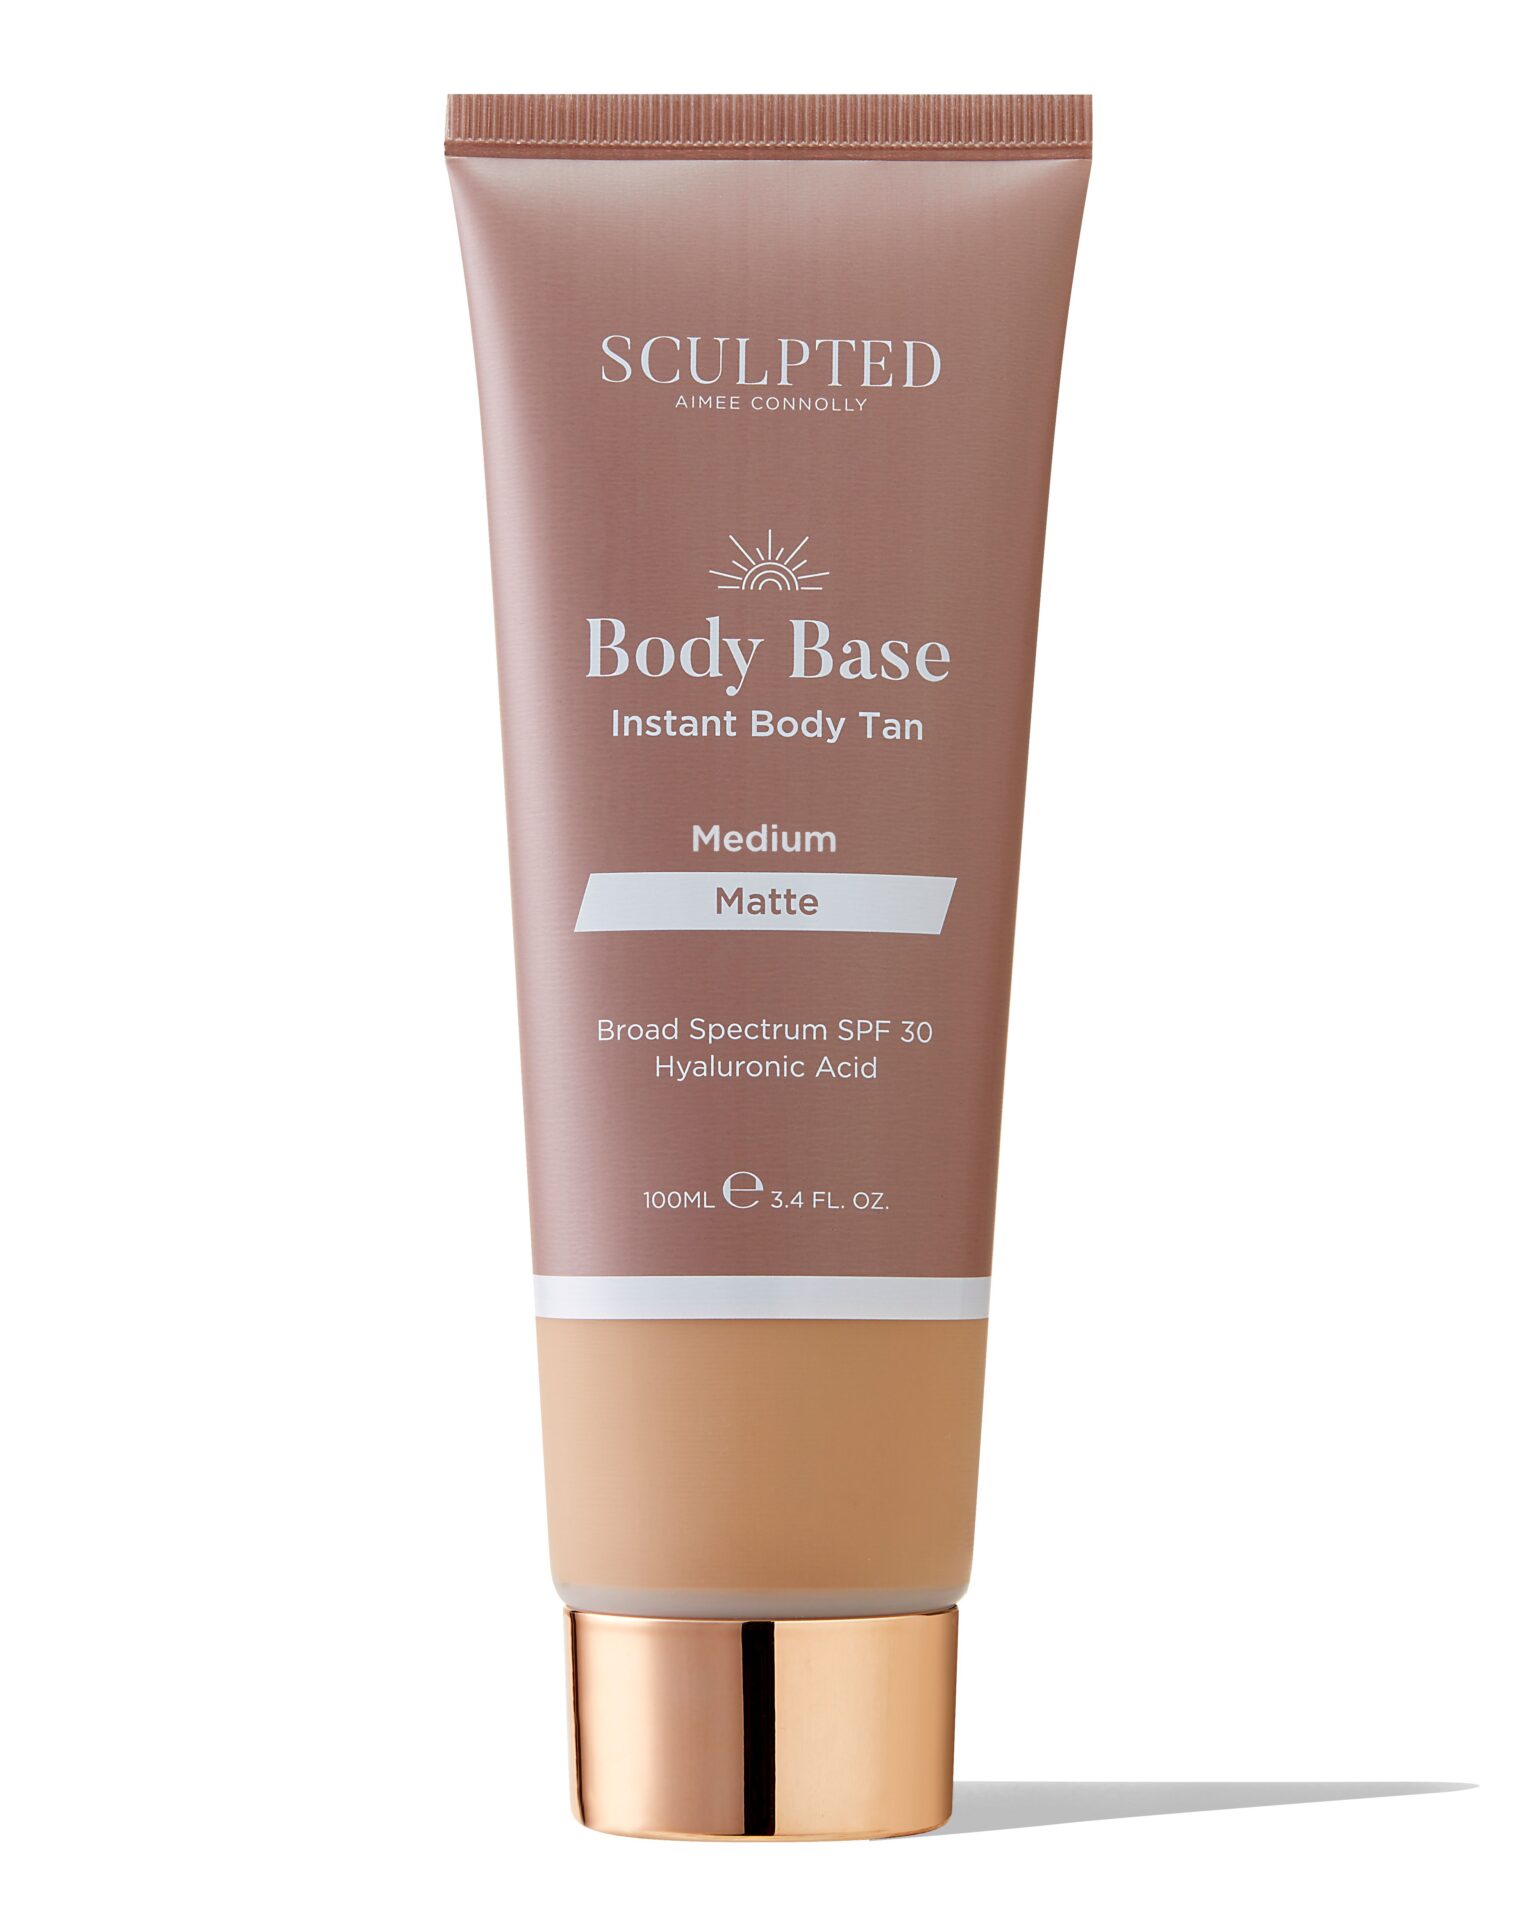 Sculpted By Aimee Connolly Body Base Instant Body Tan Matte Medium